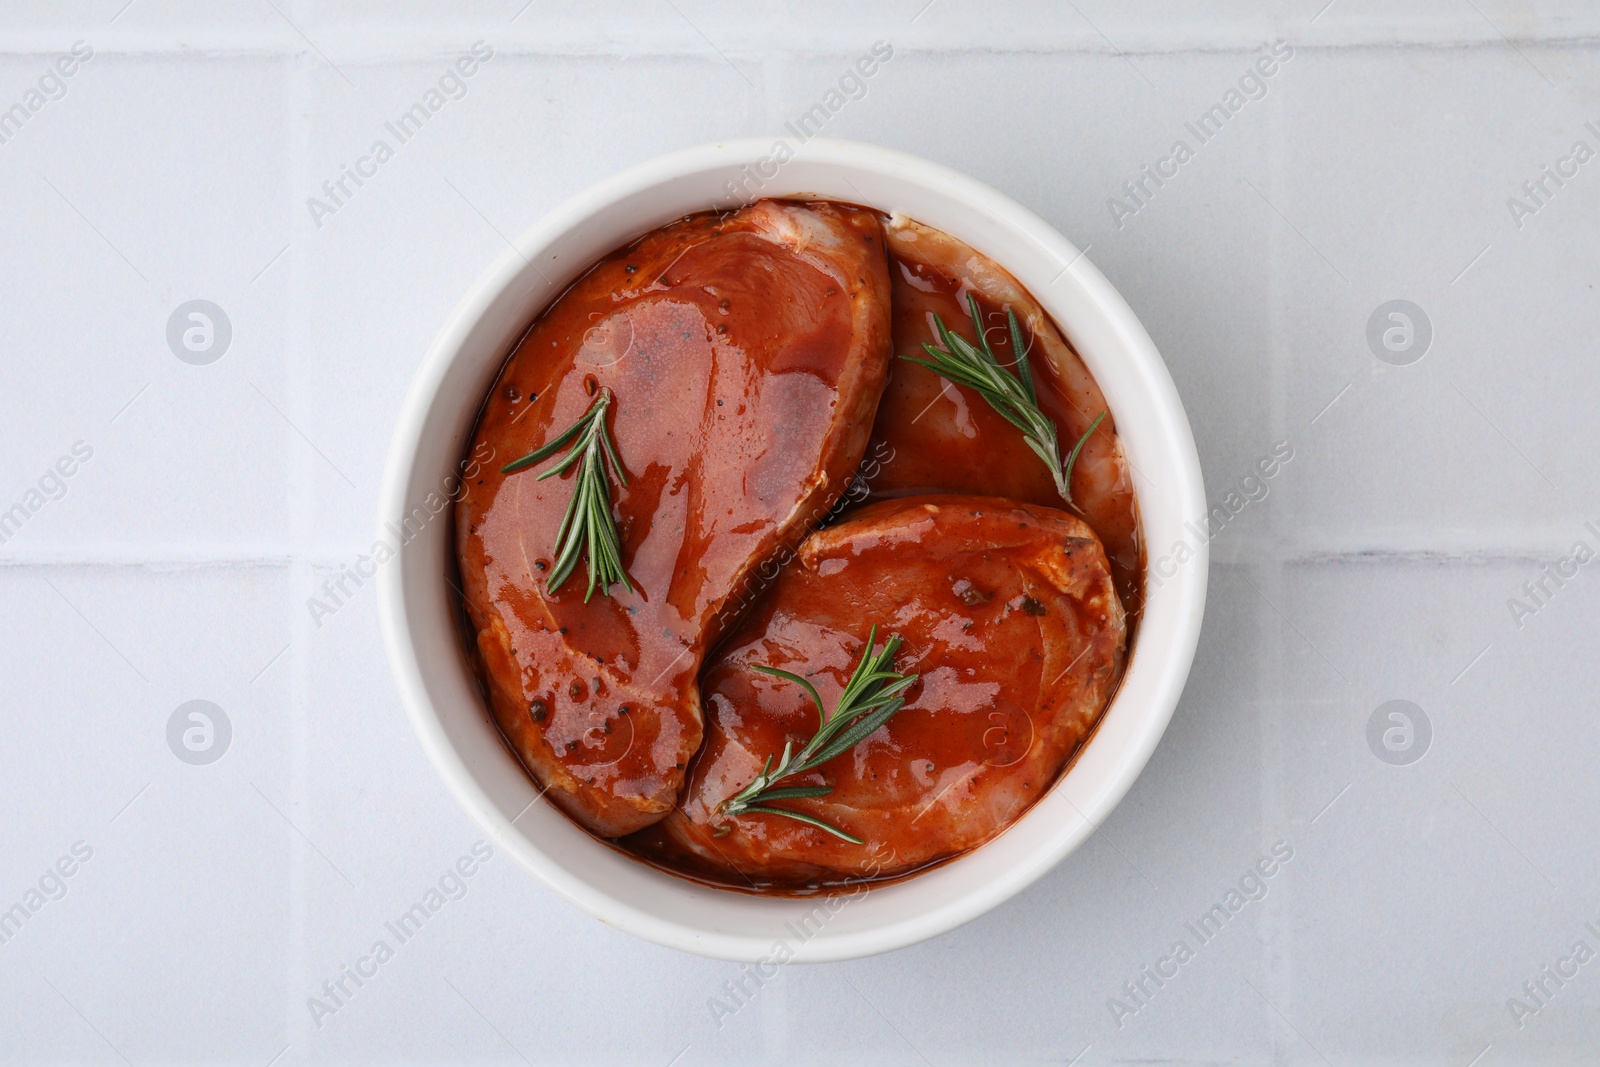 Photo of Raw marinated meat and rosemary in bowl on white tiled table, top view